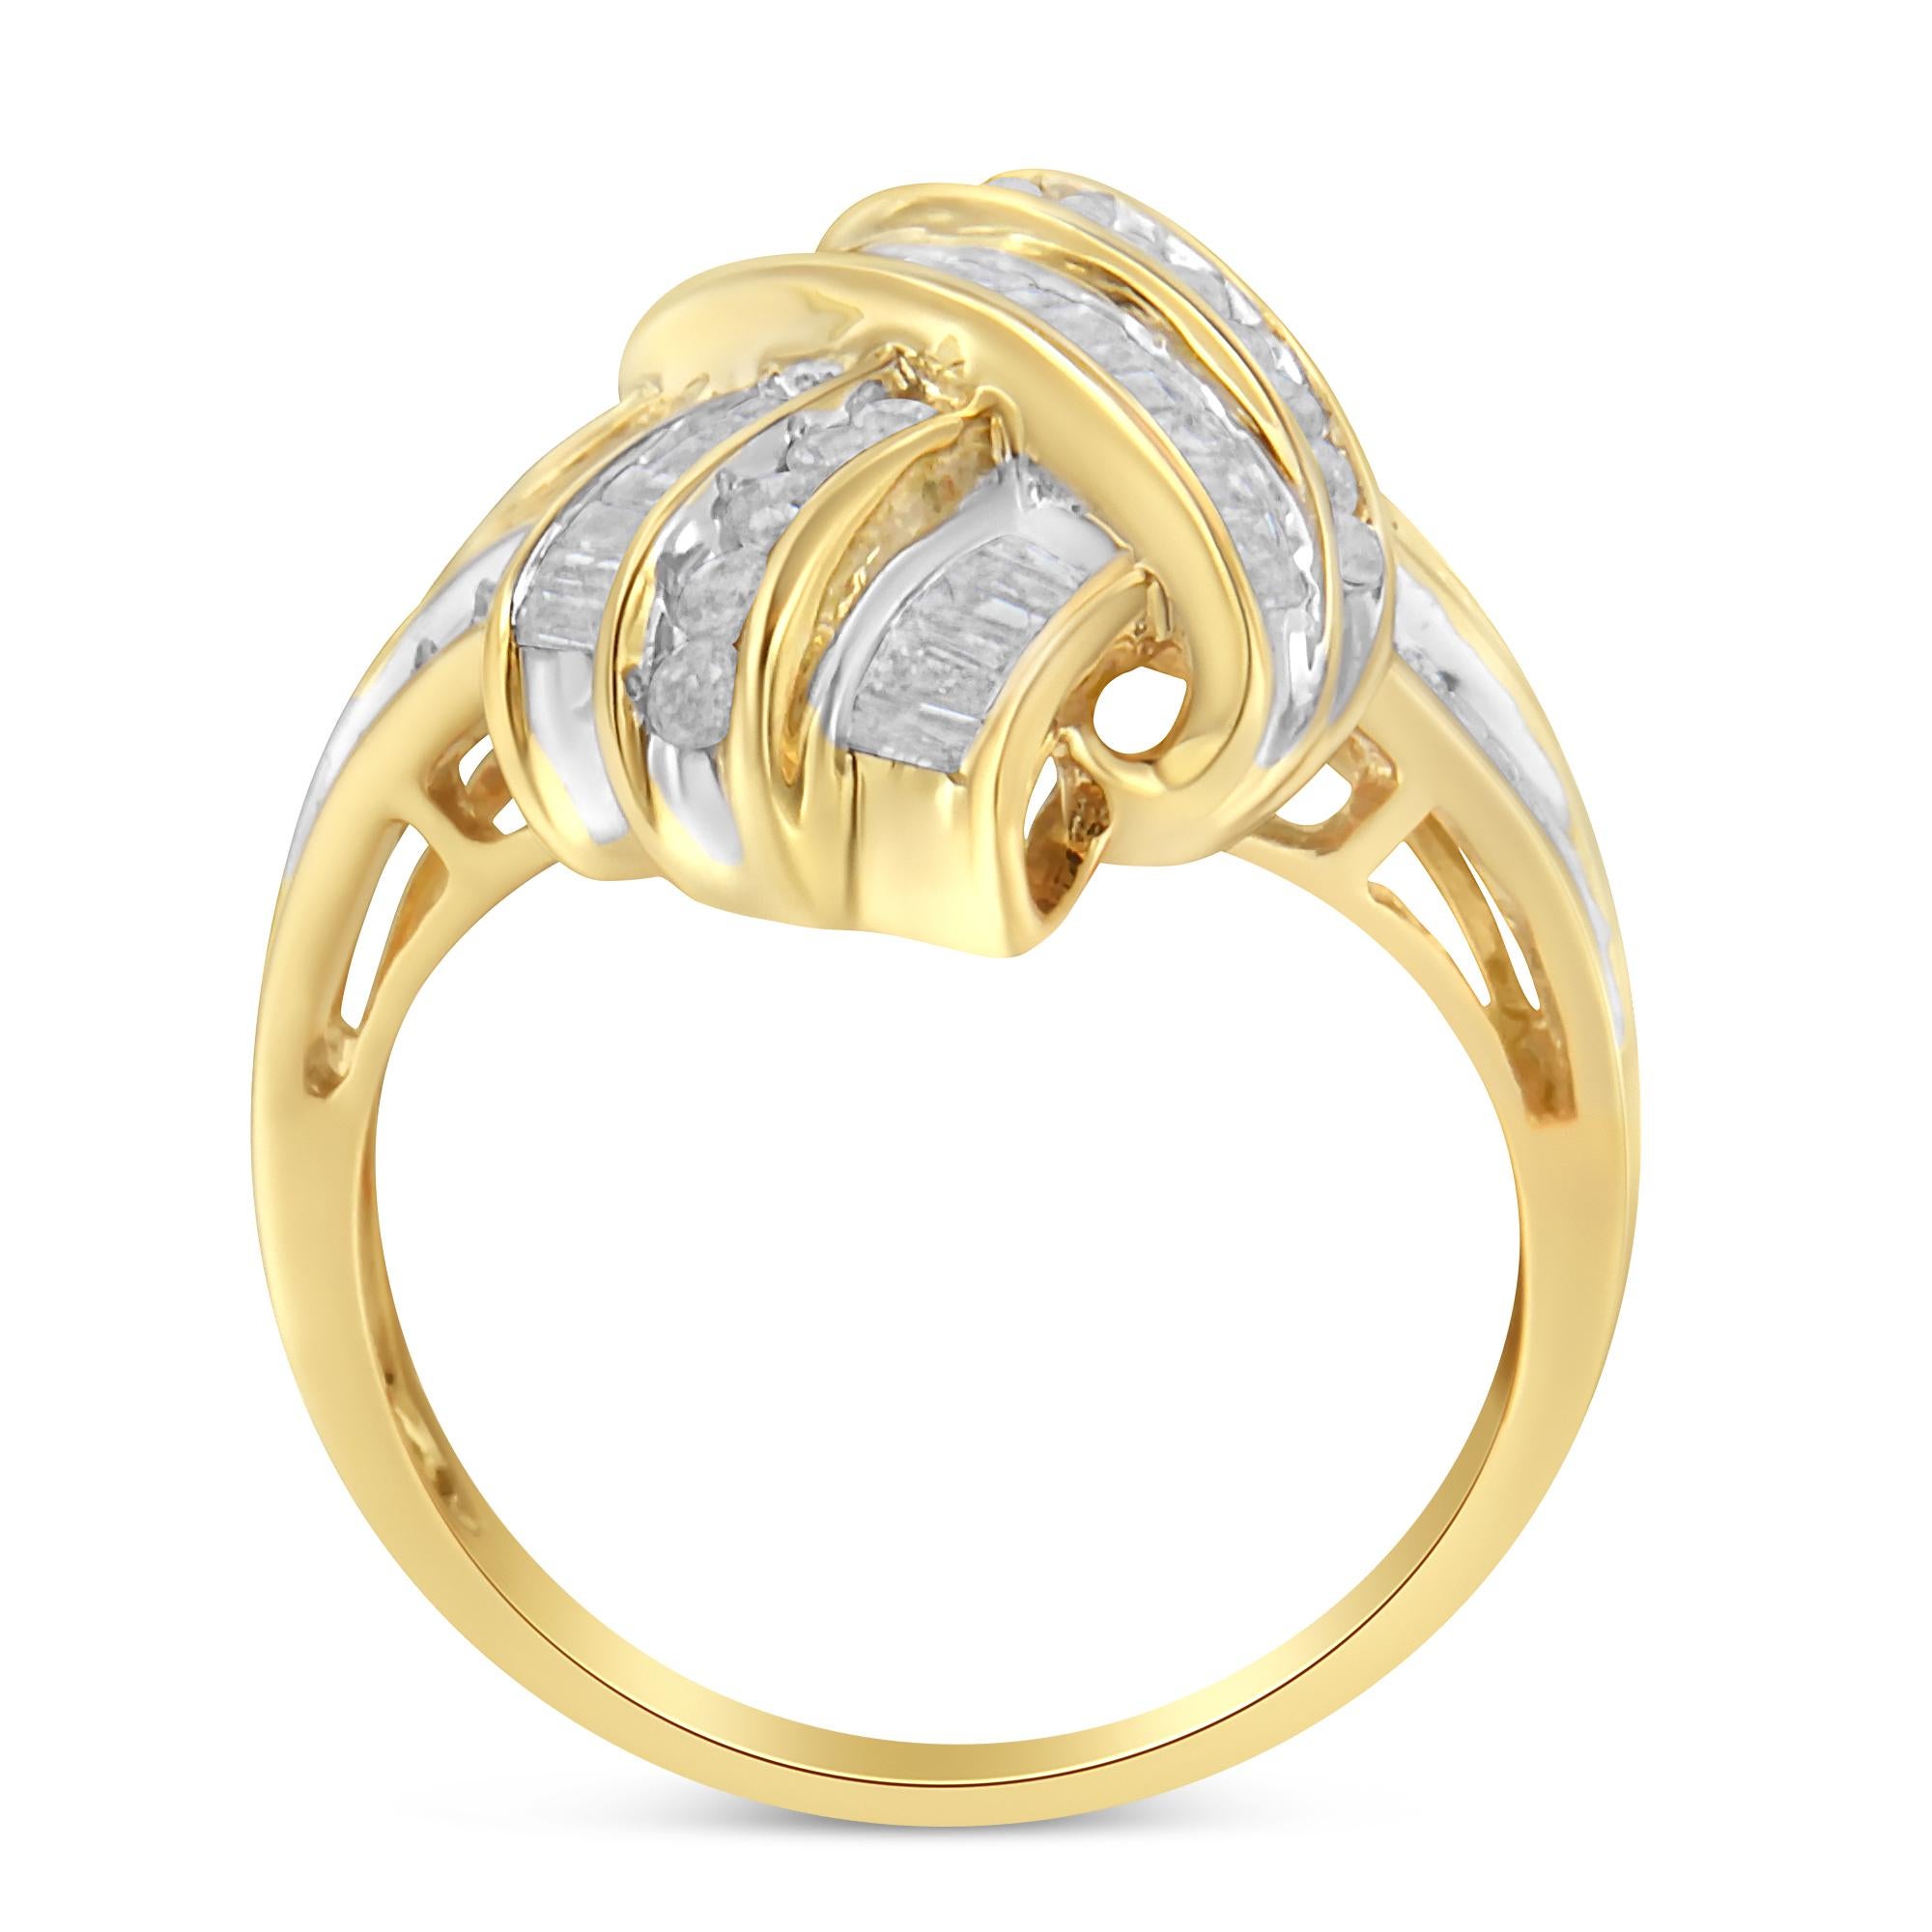 Add a touch of a glamour to your outfit with this fabulous diamond ring. Created with the finest 10k yellow gold, this piece is embellished with 25 round diamonds and 50 baguette diamonds in a channel setting. The total diamond weight is 1.2 ct,